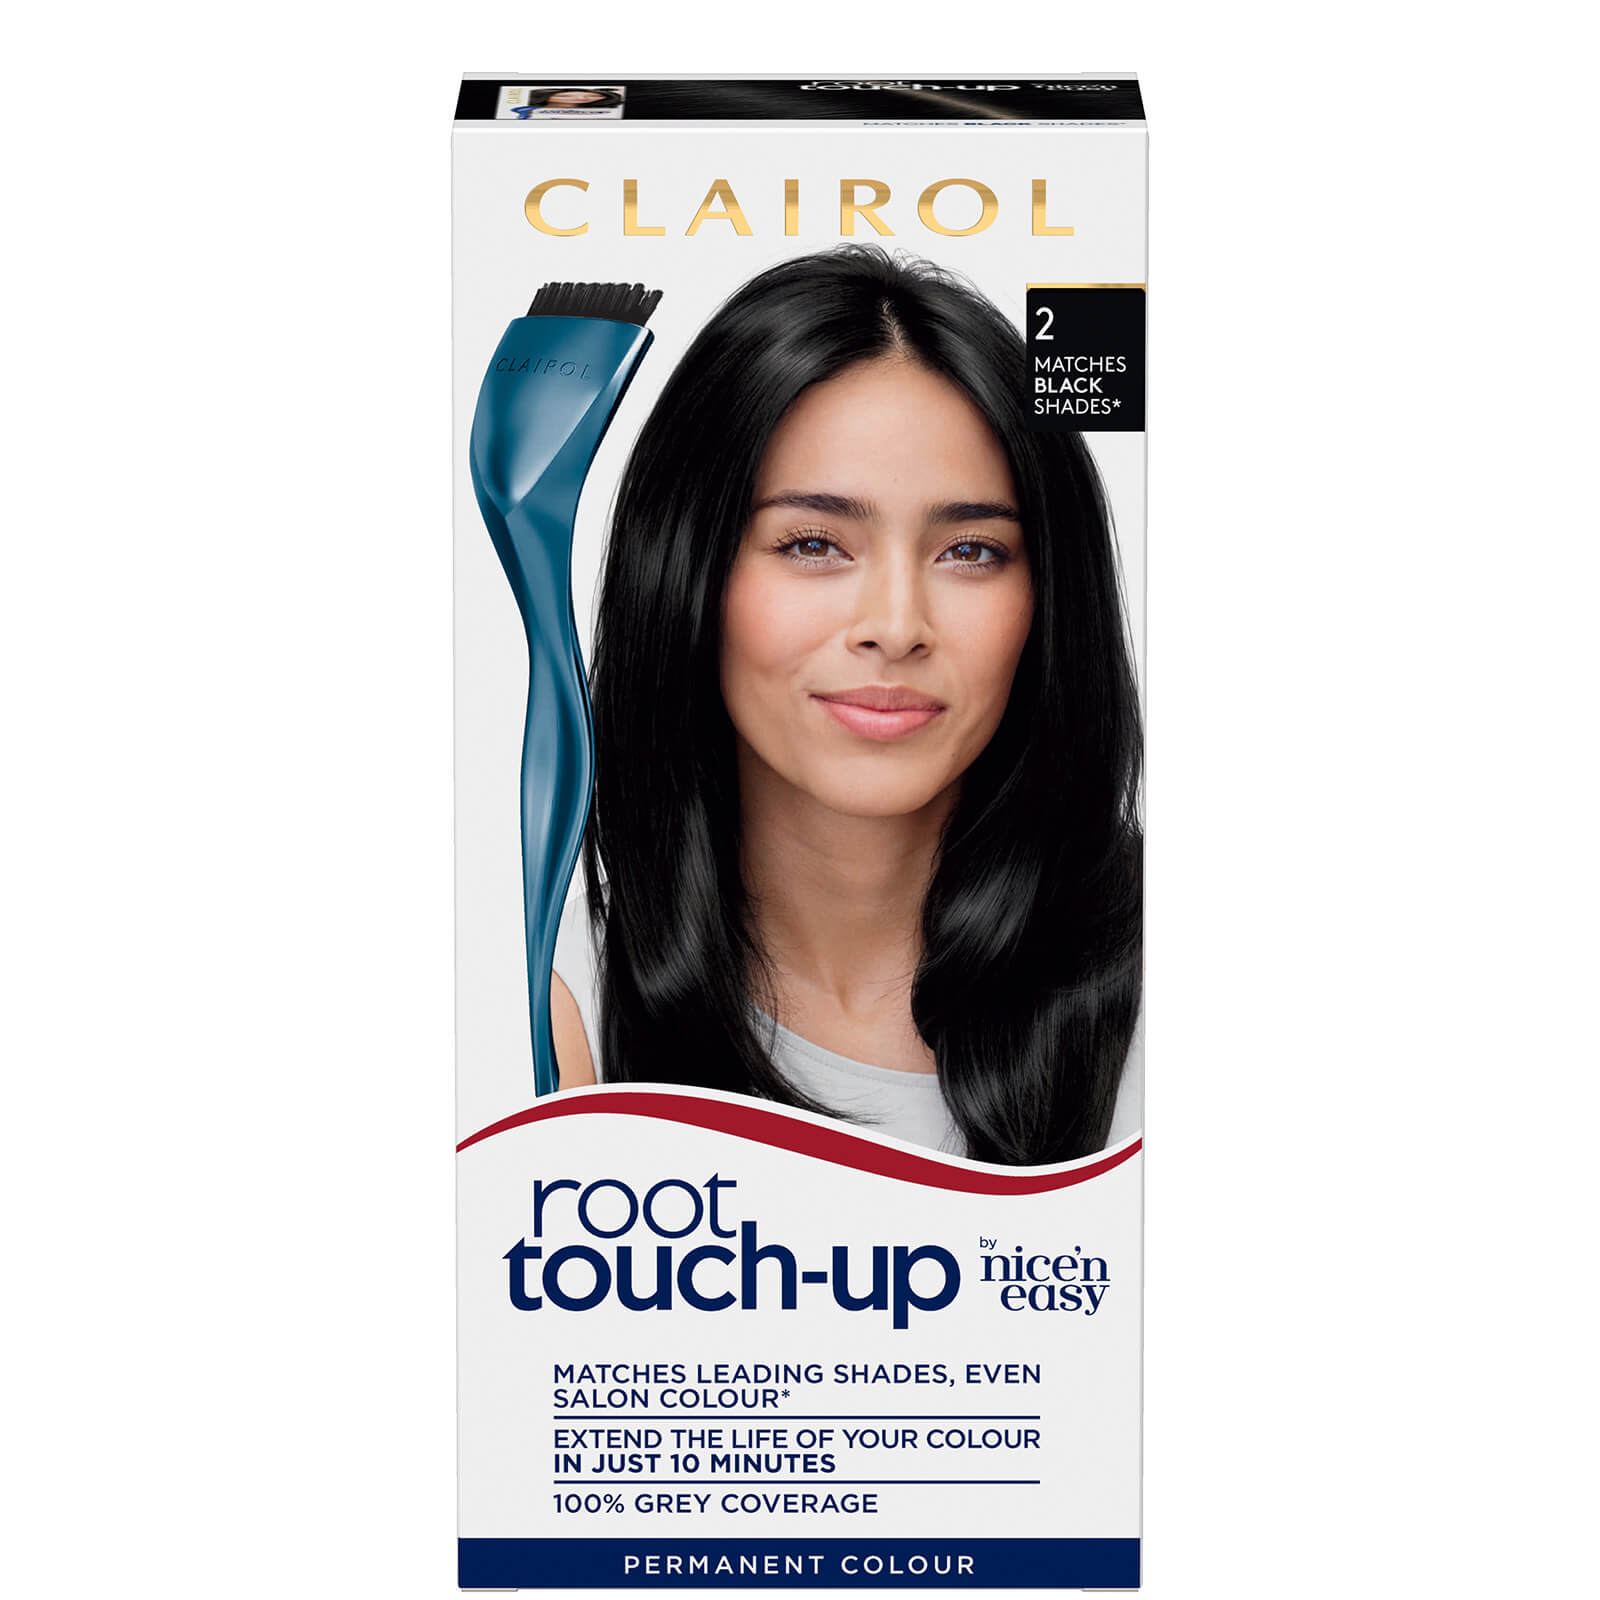 Clairol Root Touch-Up Permanent Hair Dye Long-lasting Intensifying Colour with Full Coverage 30ml (Various Shades) - 2 Black